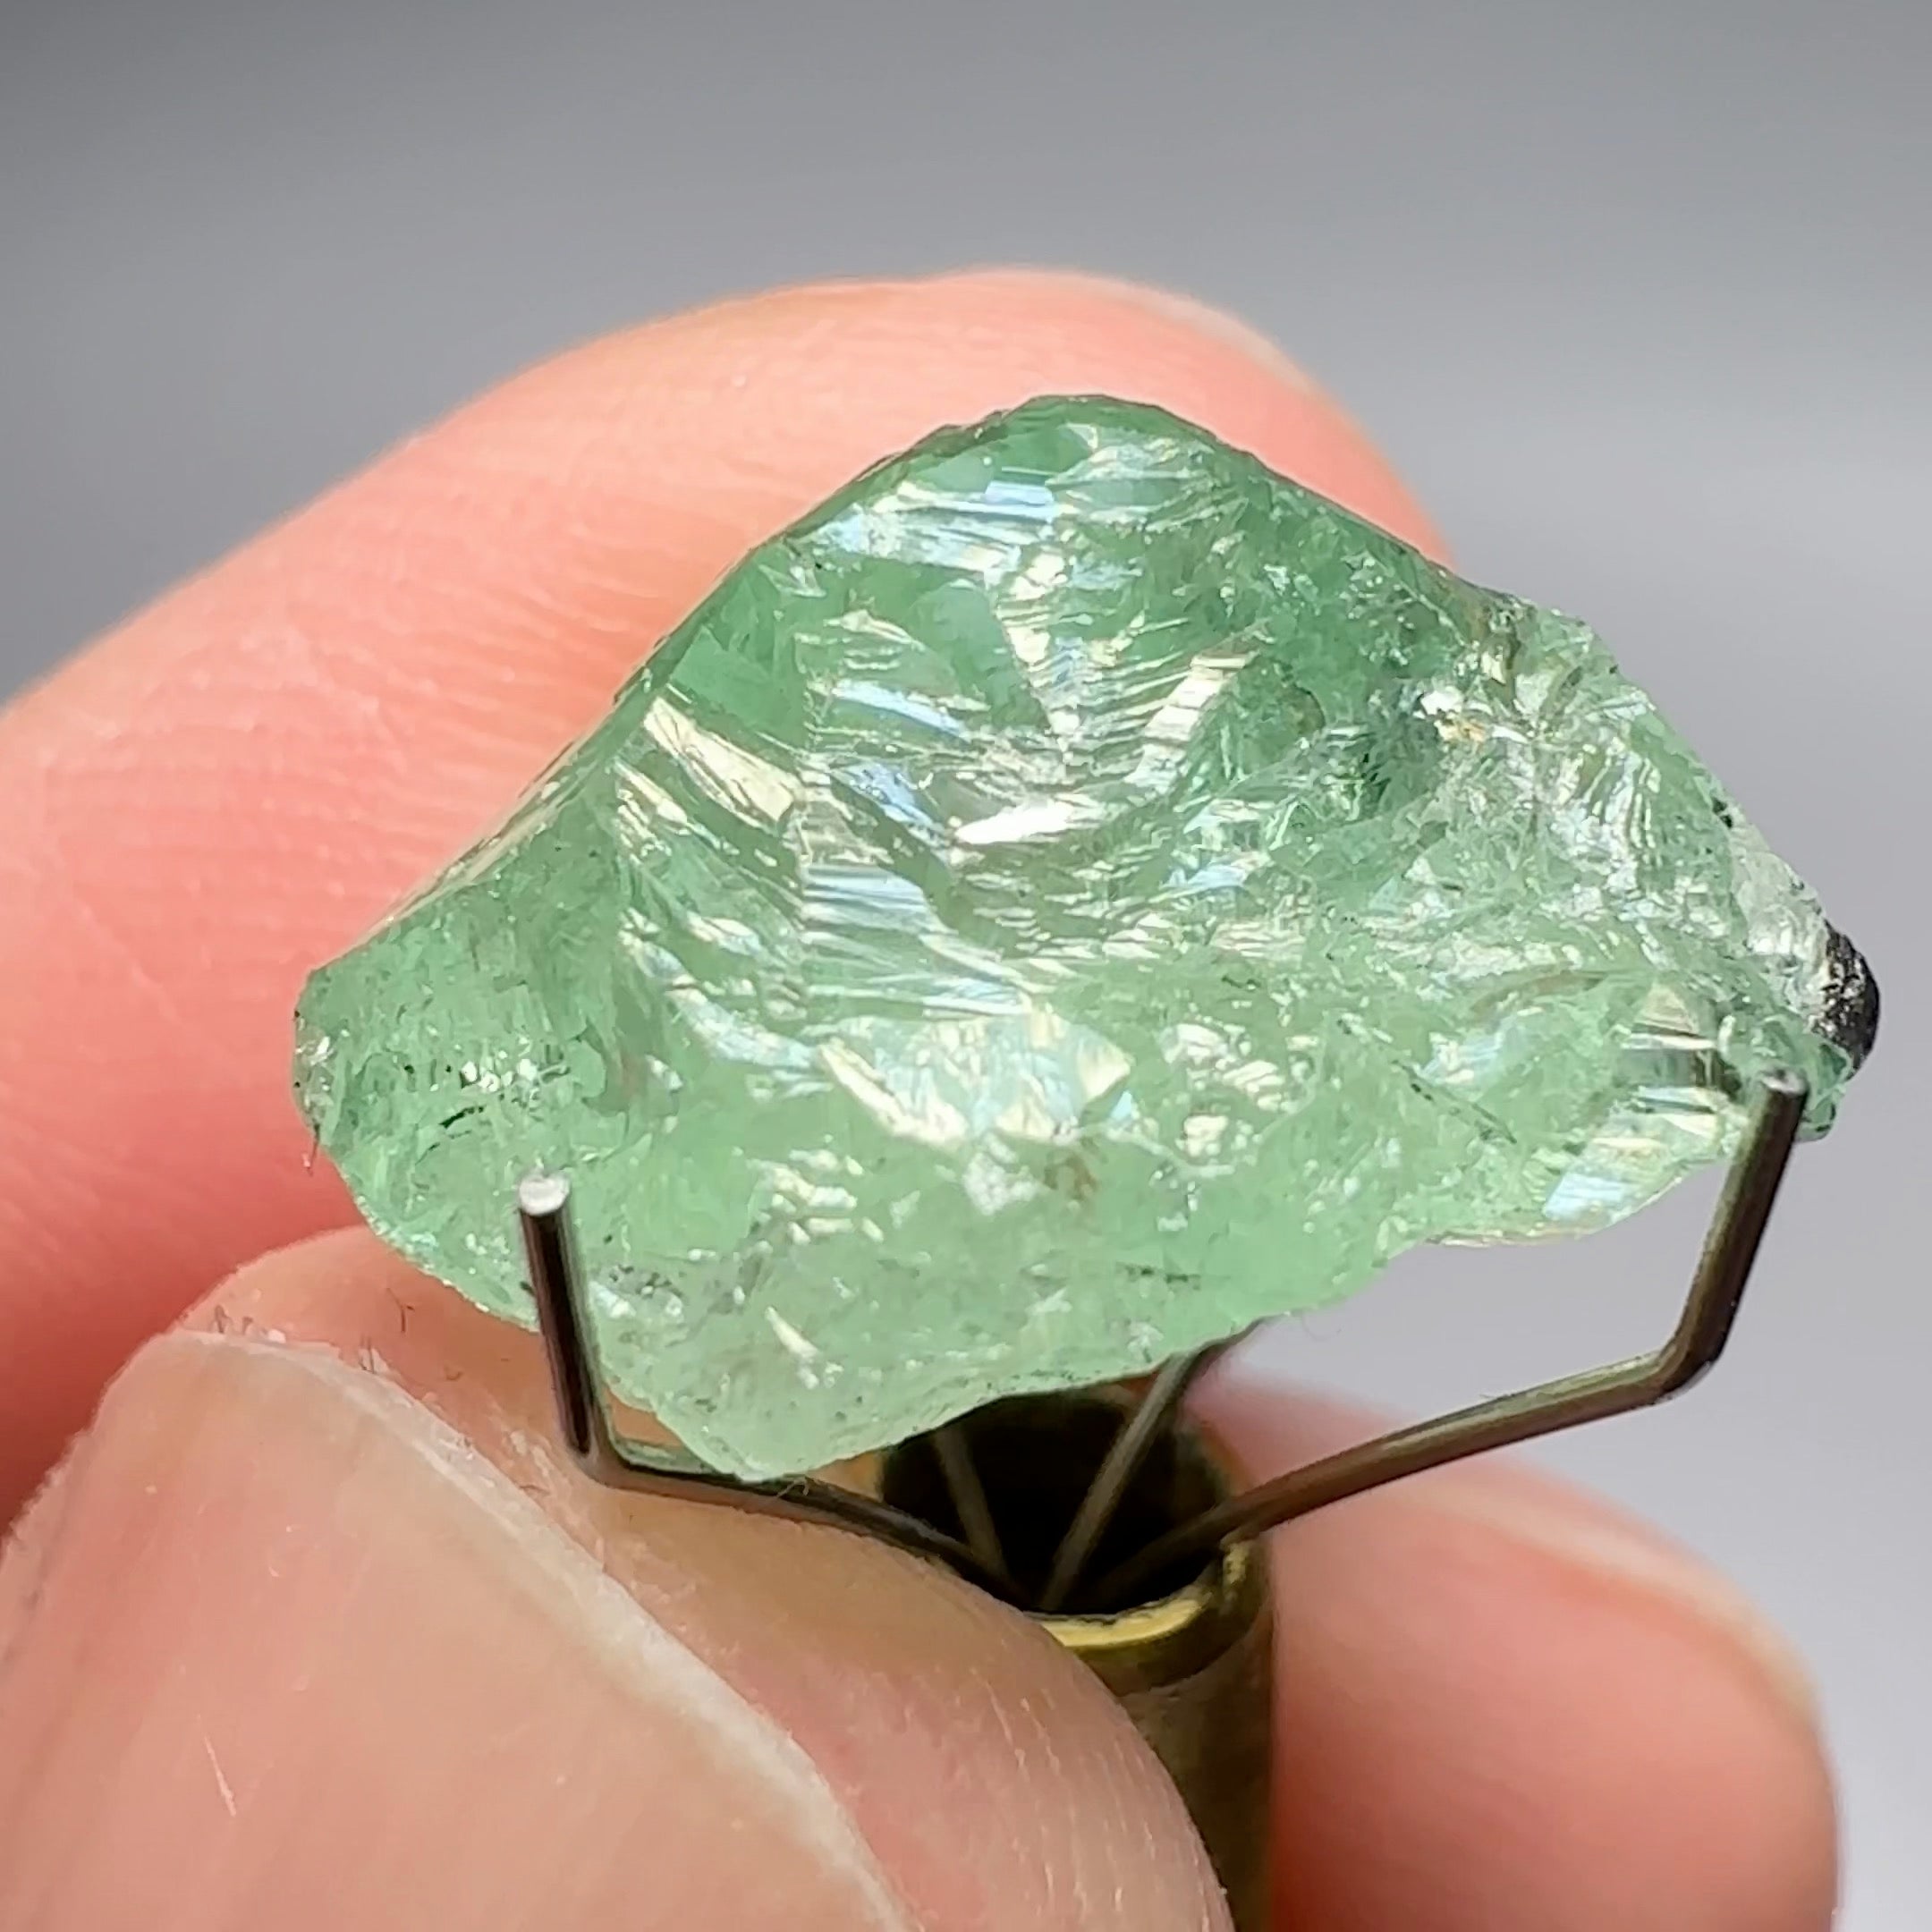 12.49ct Tsavorite Crystal Facetable Portions Inside/ also good for a cab, probably needs to be split in two, Tanzania, Untreated Unheated